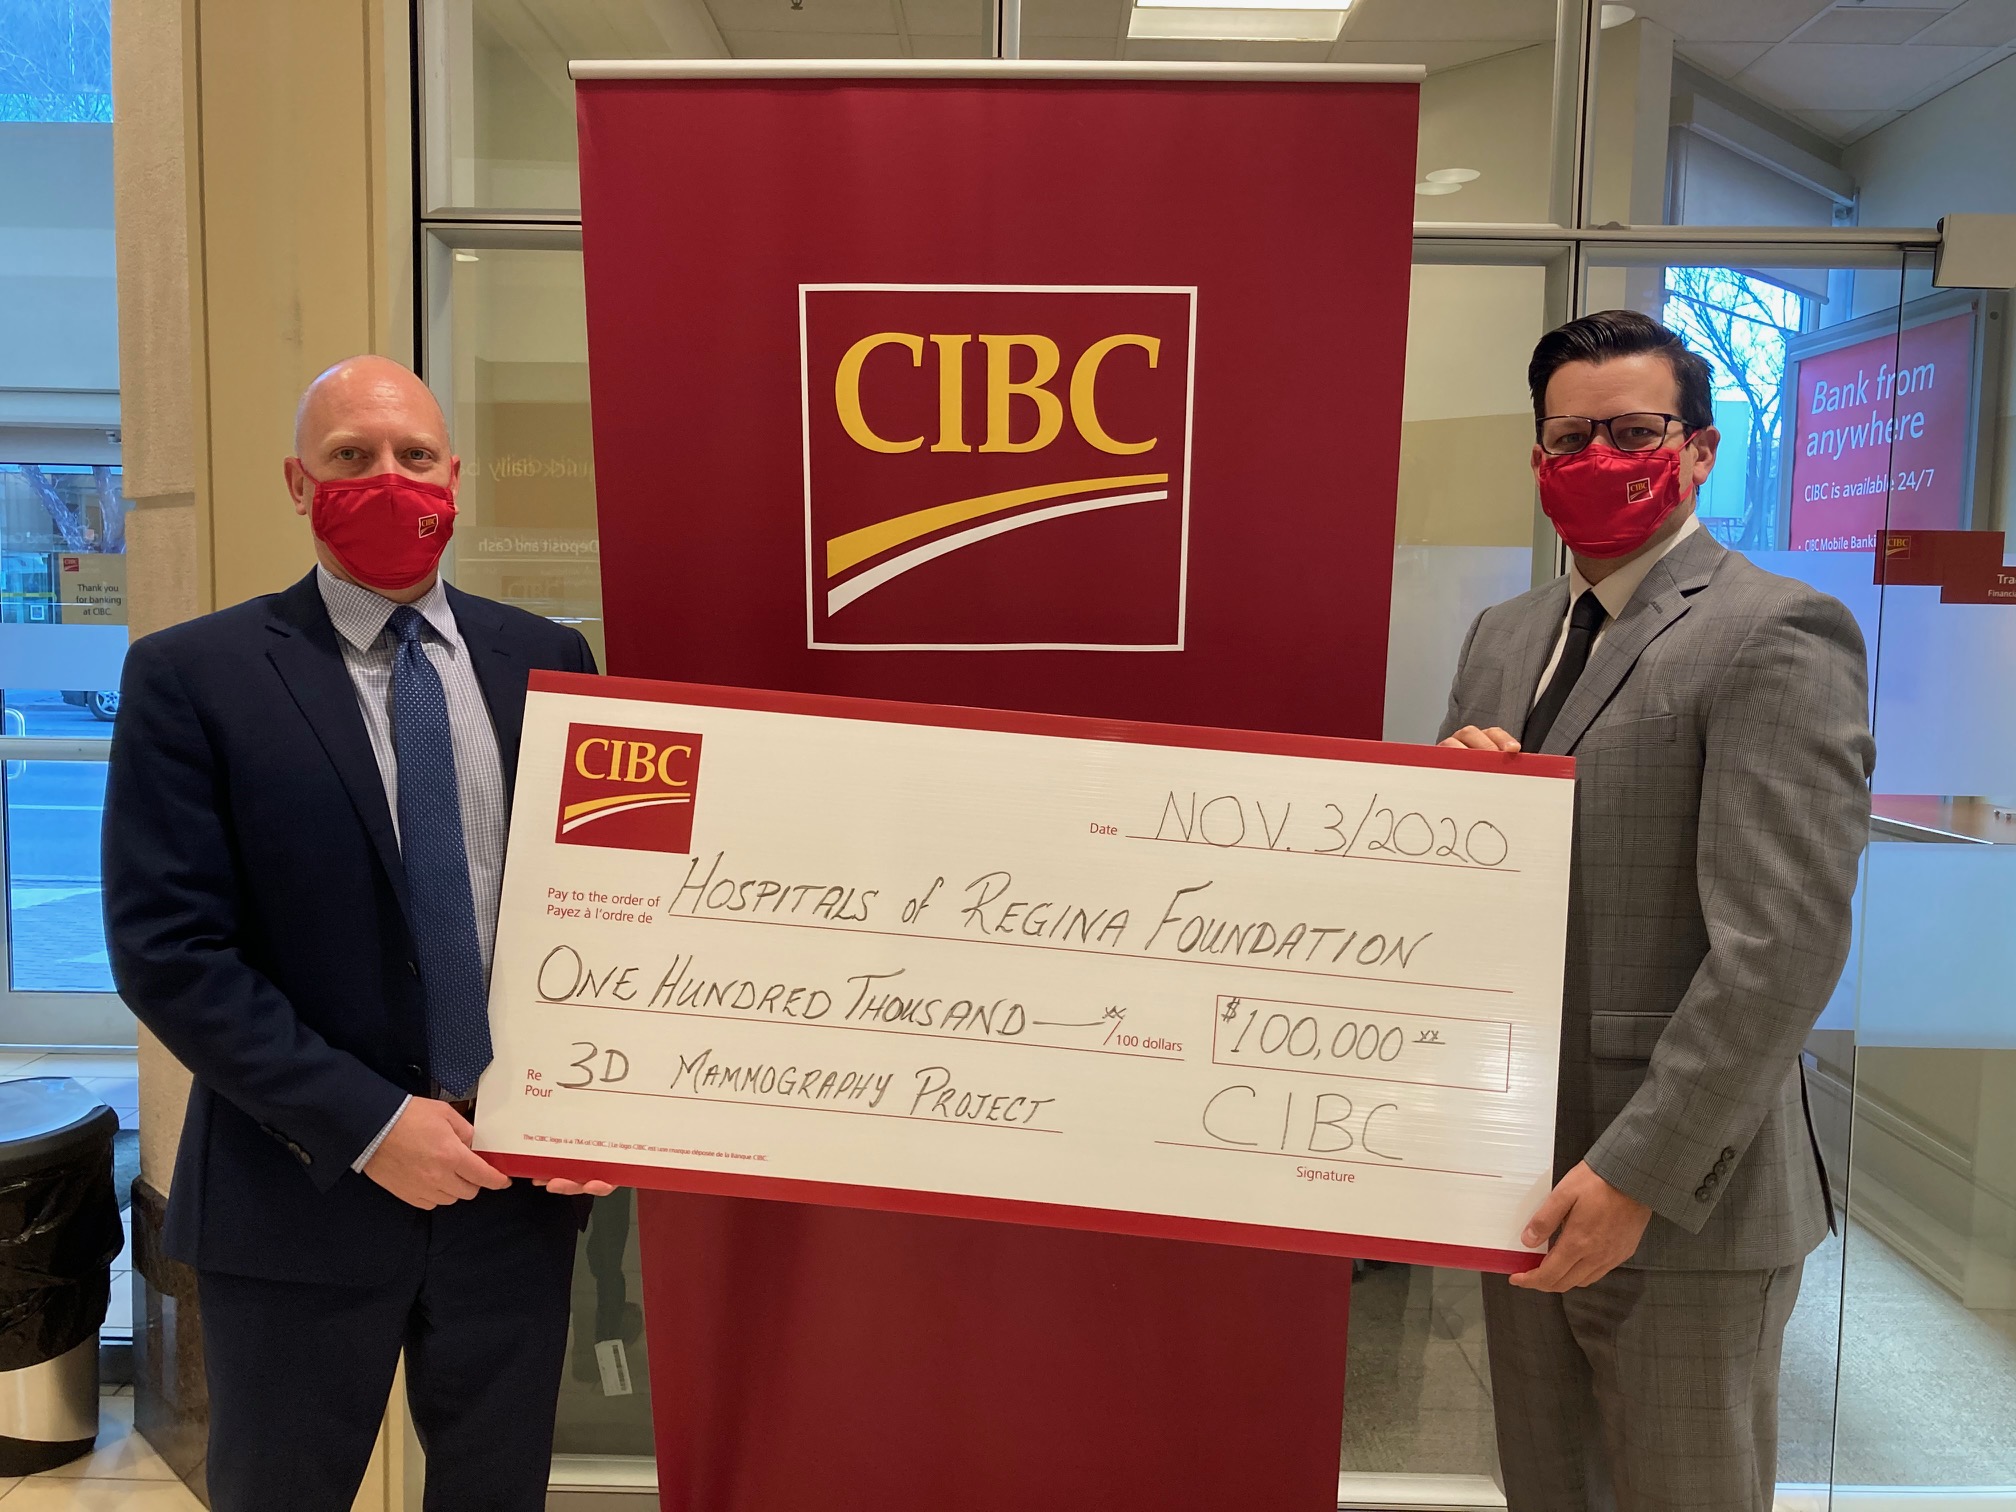 CIBC Joins the Fight Against Breast Cancer in Saskatchewan